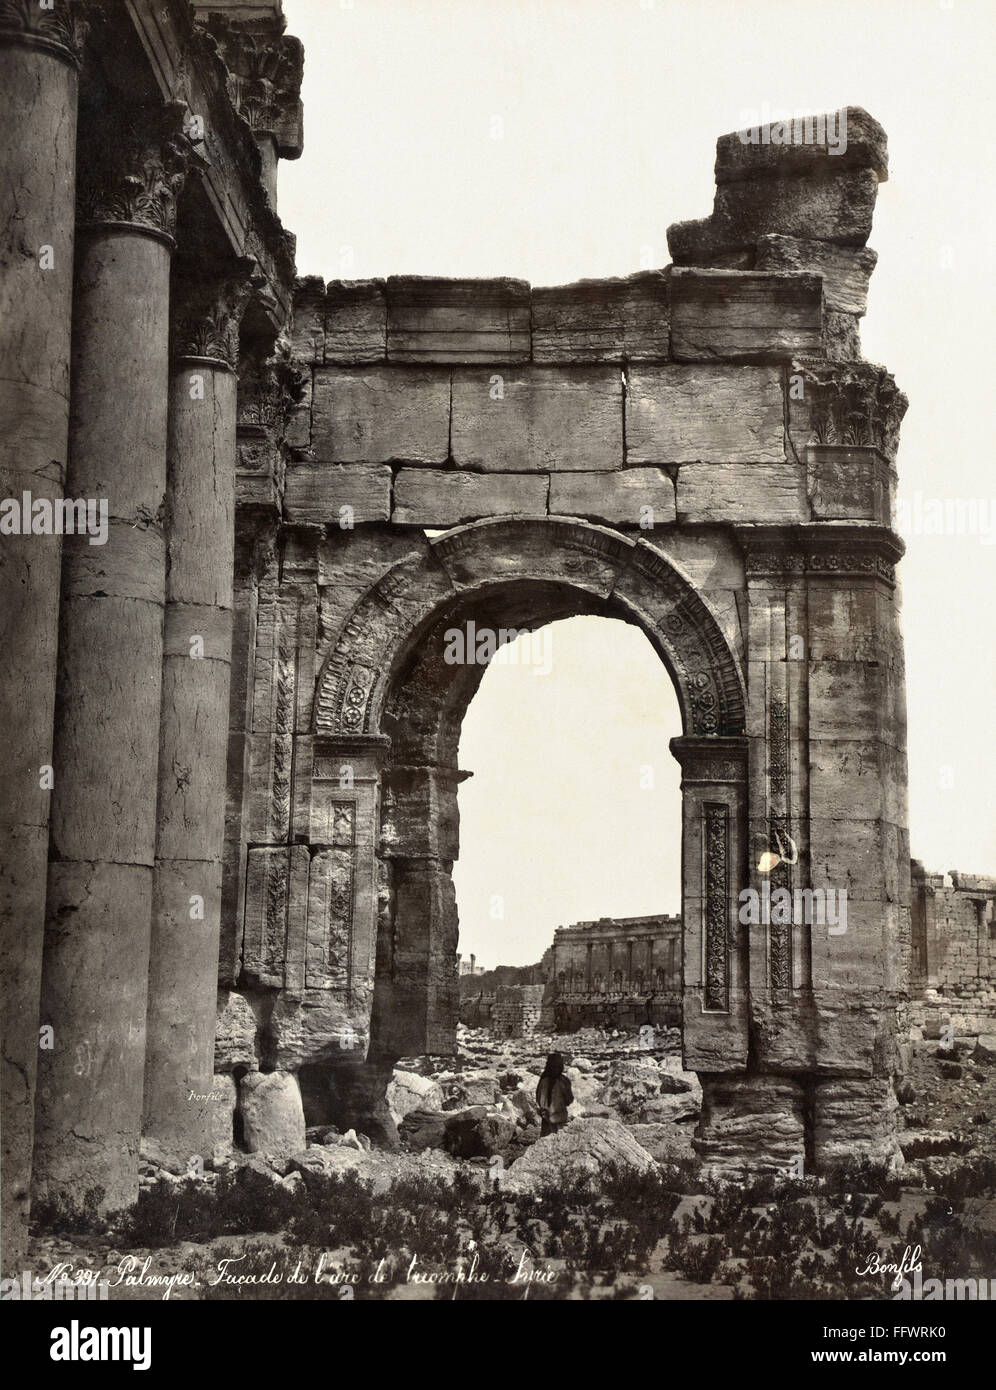 PALMYRA: TRIUMPHAL ARCH. /nFacade of the triumphal arch at Palmyra, Syria. Photograph, late 19th century. Stock Photo